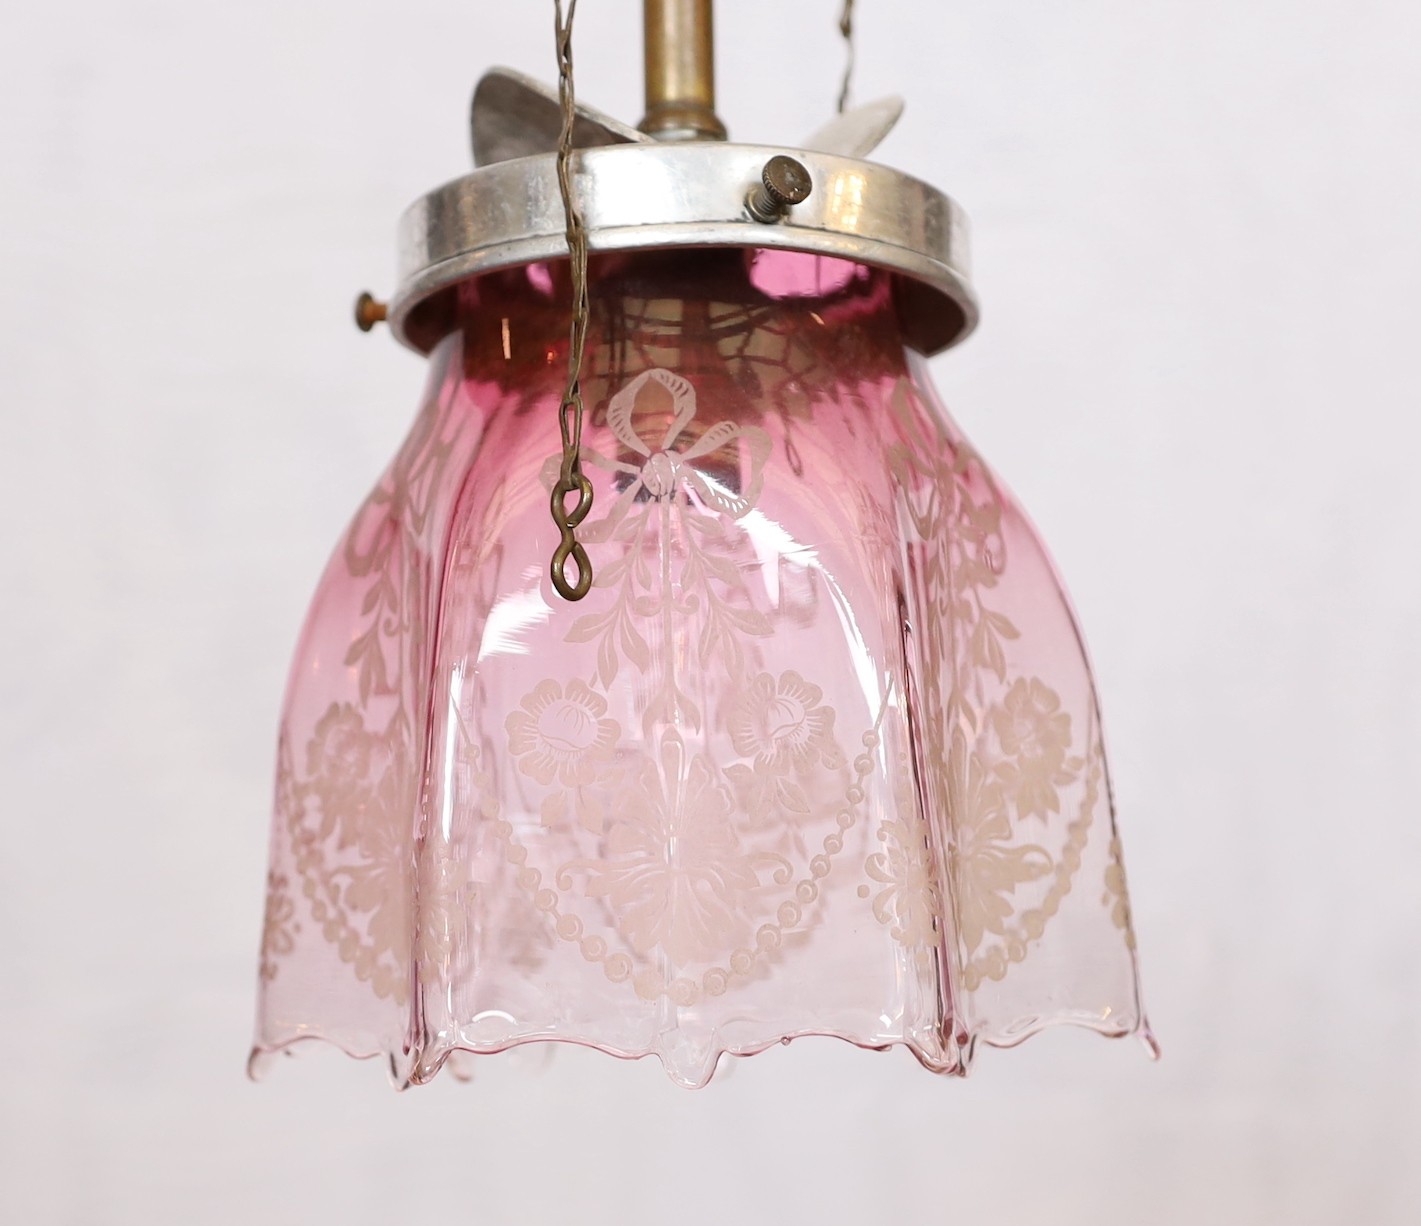 An early 20th century English brass gasolier light fitting, converted to electricity, with pink tinted etched glass shade, height 50cm